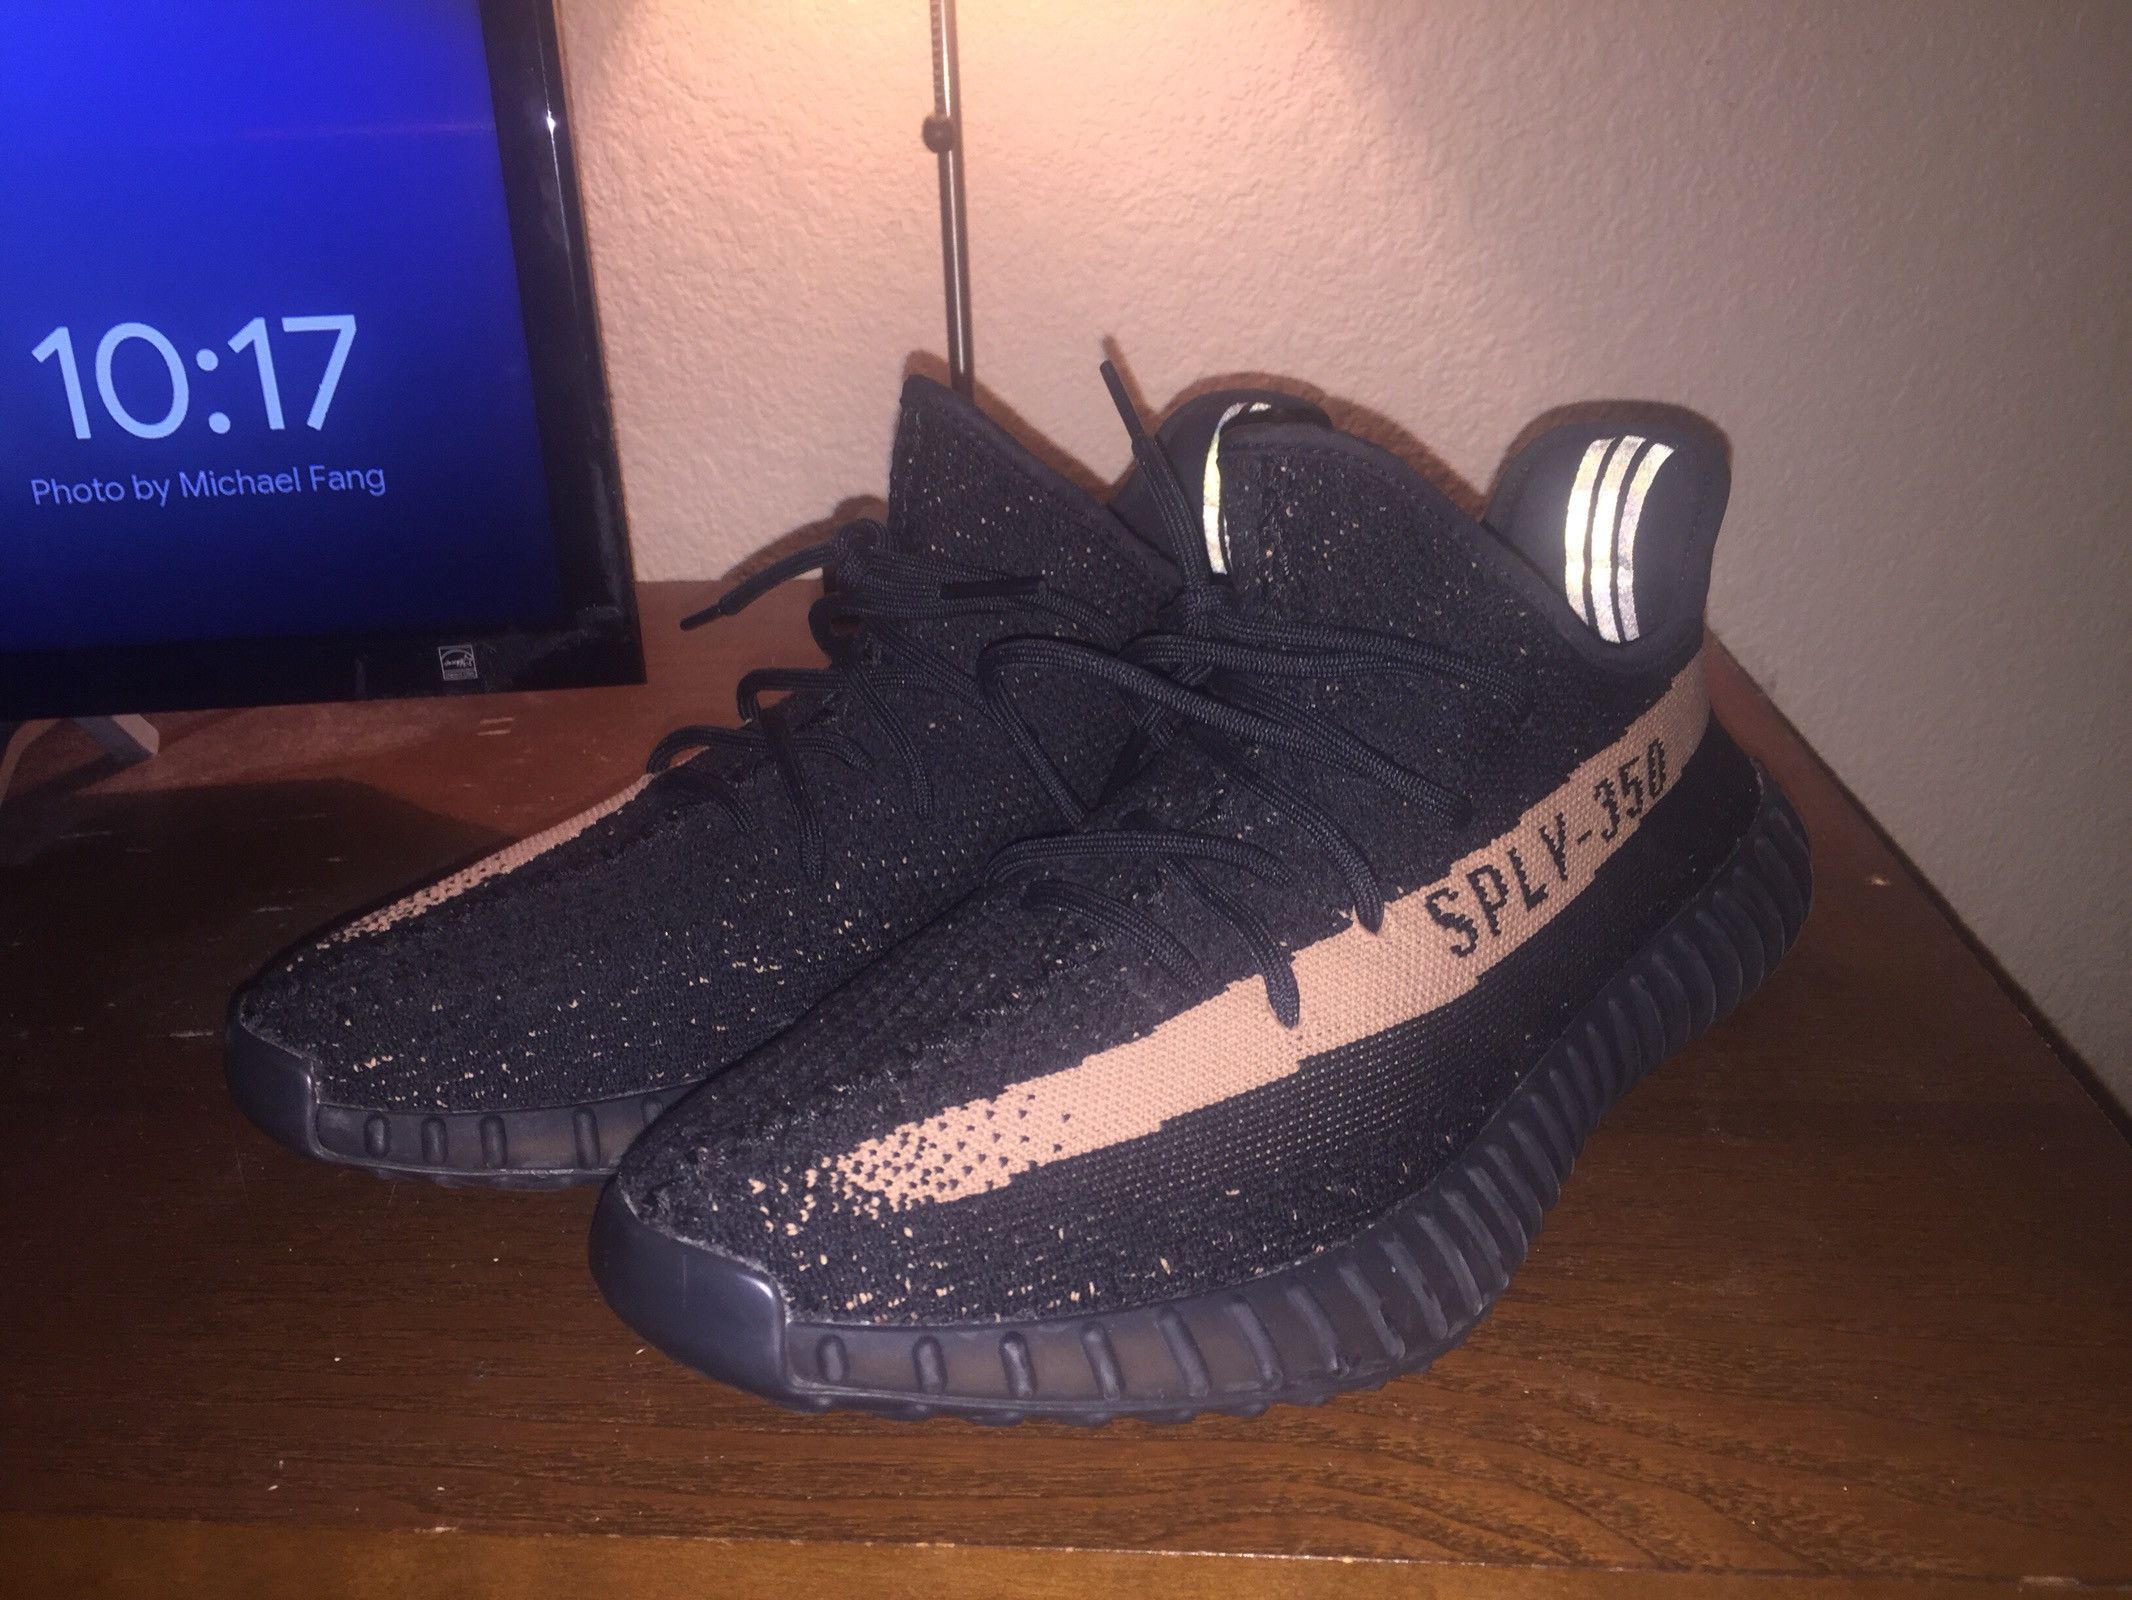 Adidas Yeezy 350 Boost V2 Copper Size US 12 / EU 45 - 2 Preview